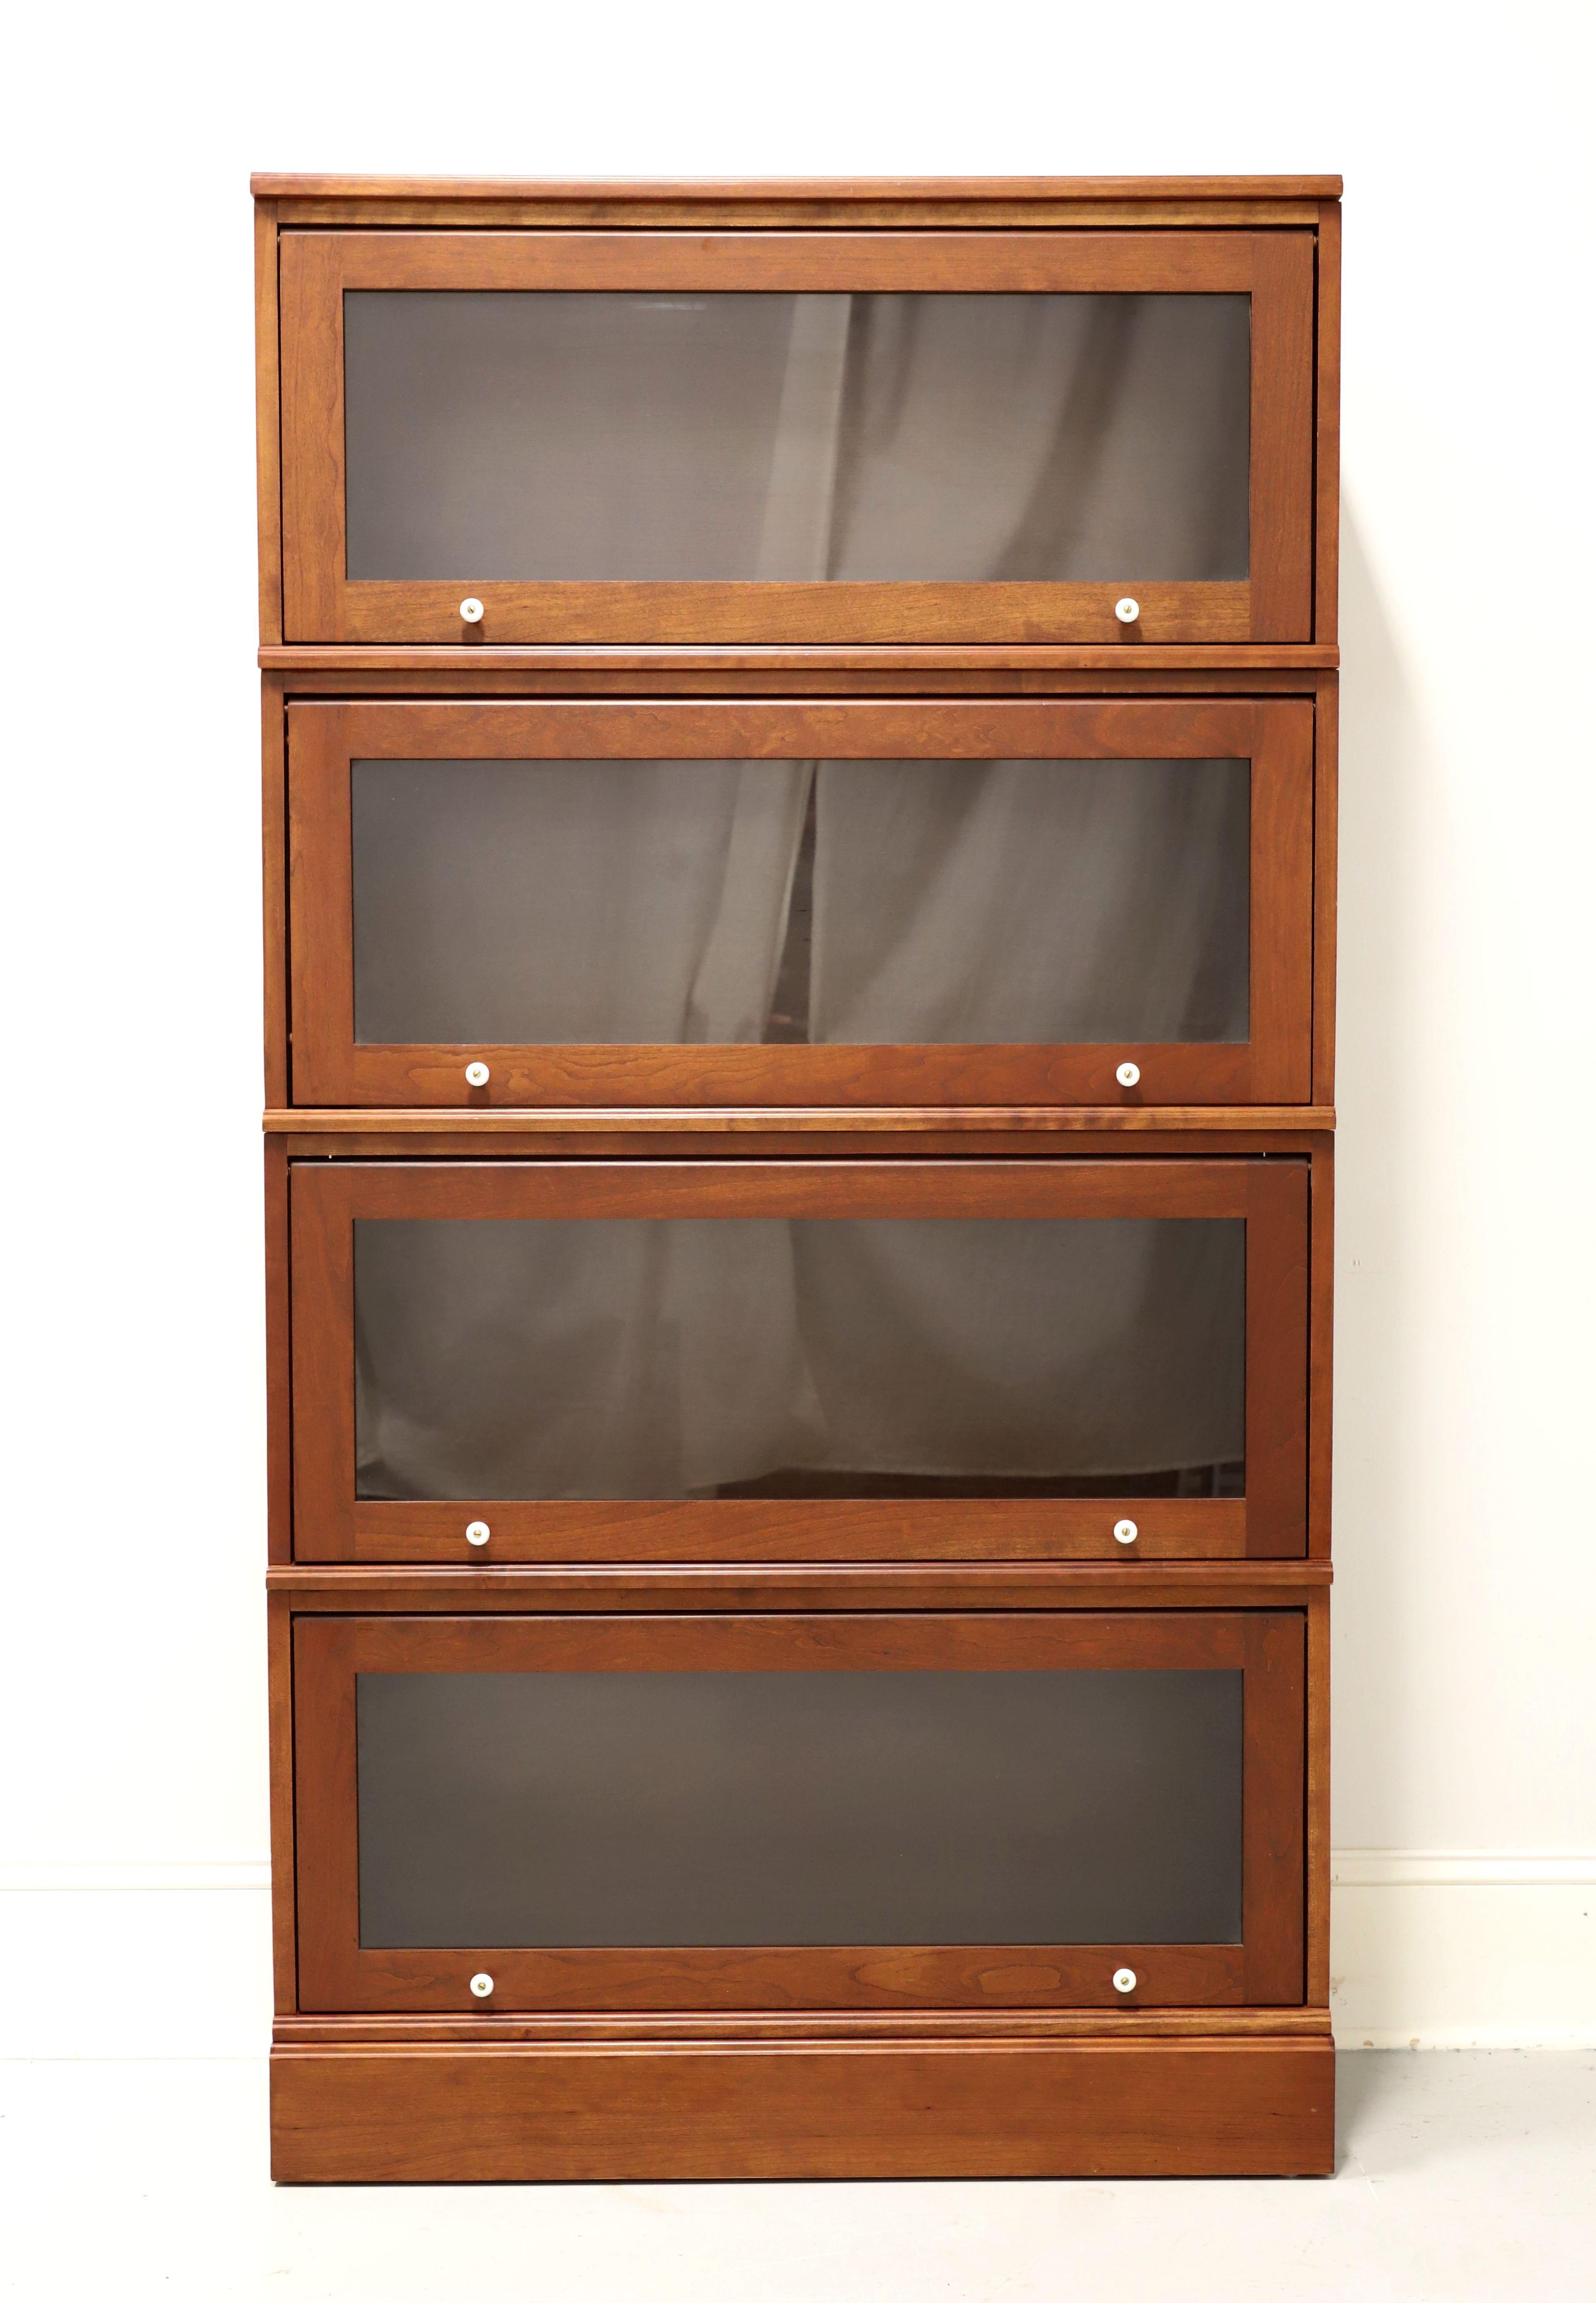 An Arts & Crafts style stacking barrister bookcase by Amish craftsmen. Handcrafted of solid cherry wood with white porcelain knobs, bevel edge to front of top and a solid base. Features the top, four stacking flip up slide back glass door bookcase